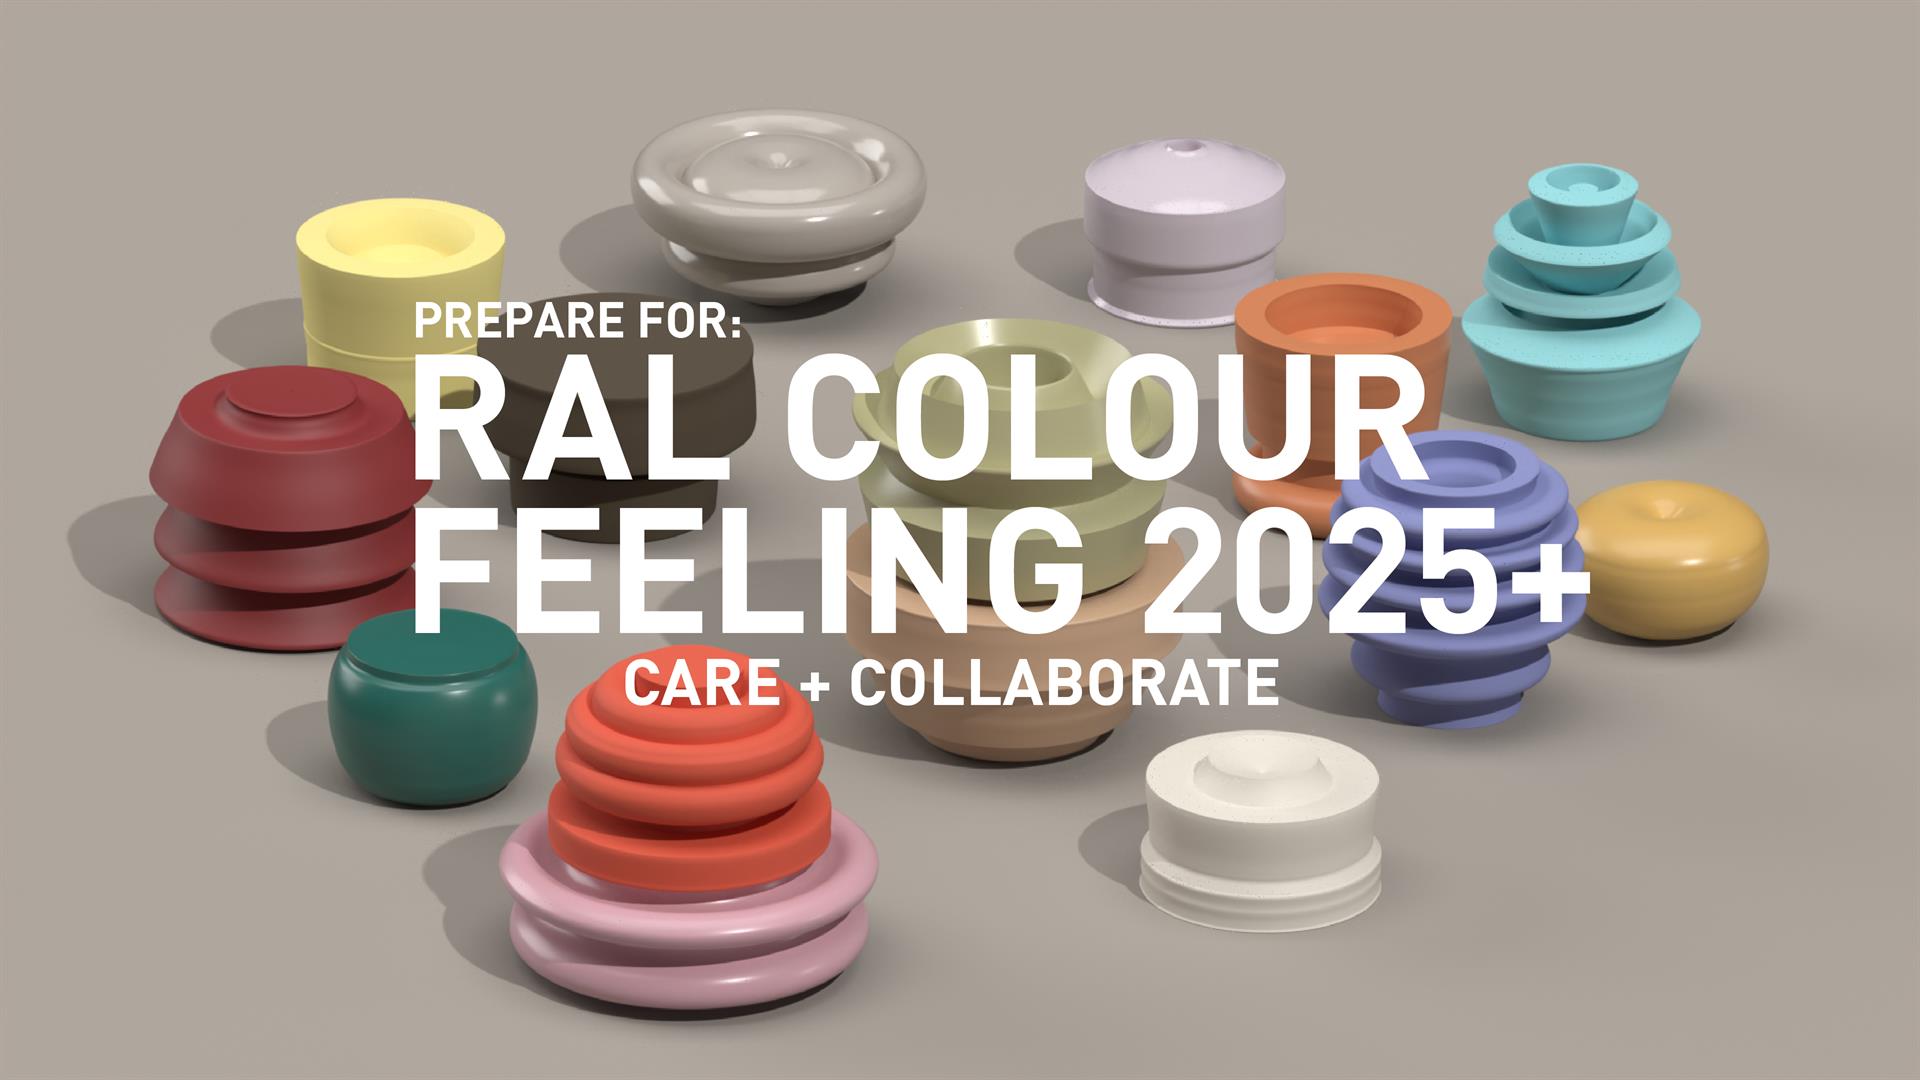 Save the Date: RAL COLOUR FEELING 2025+